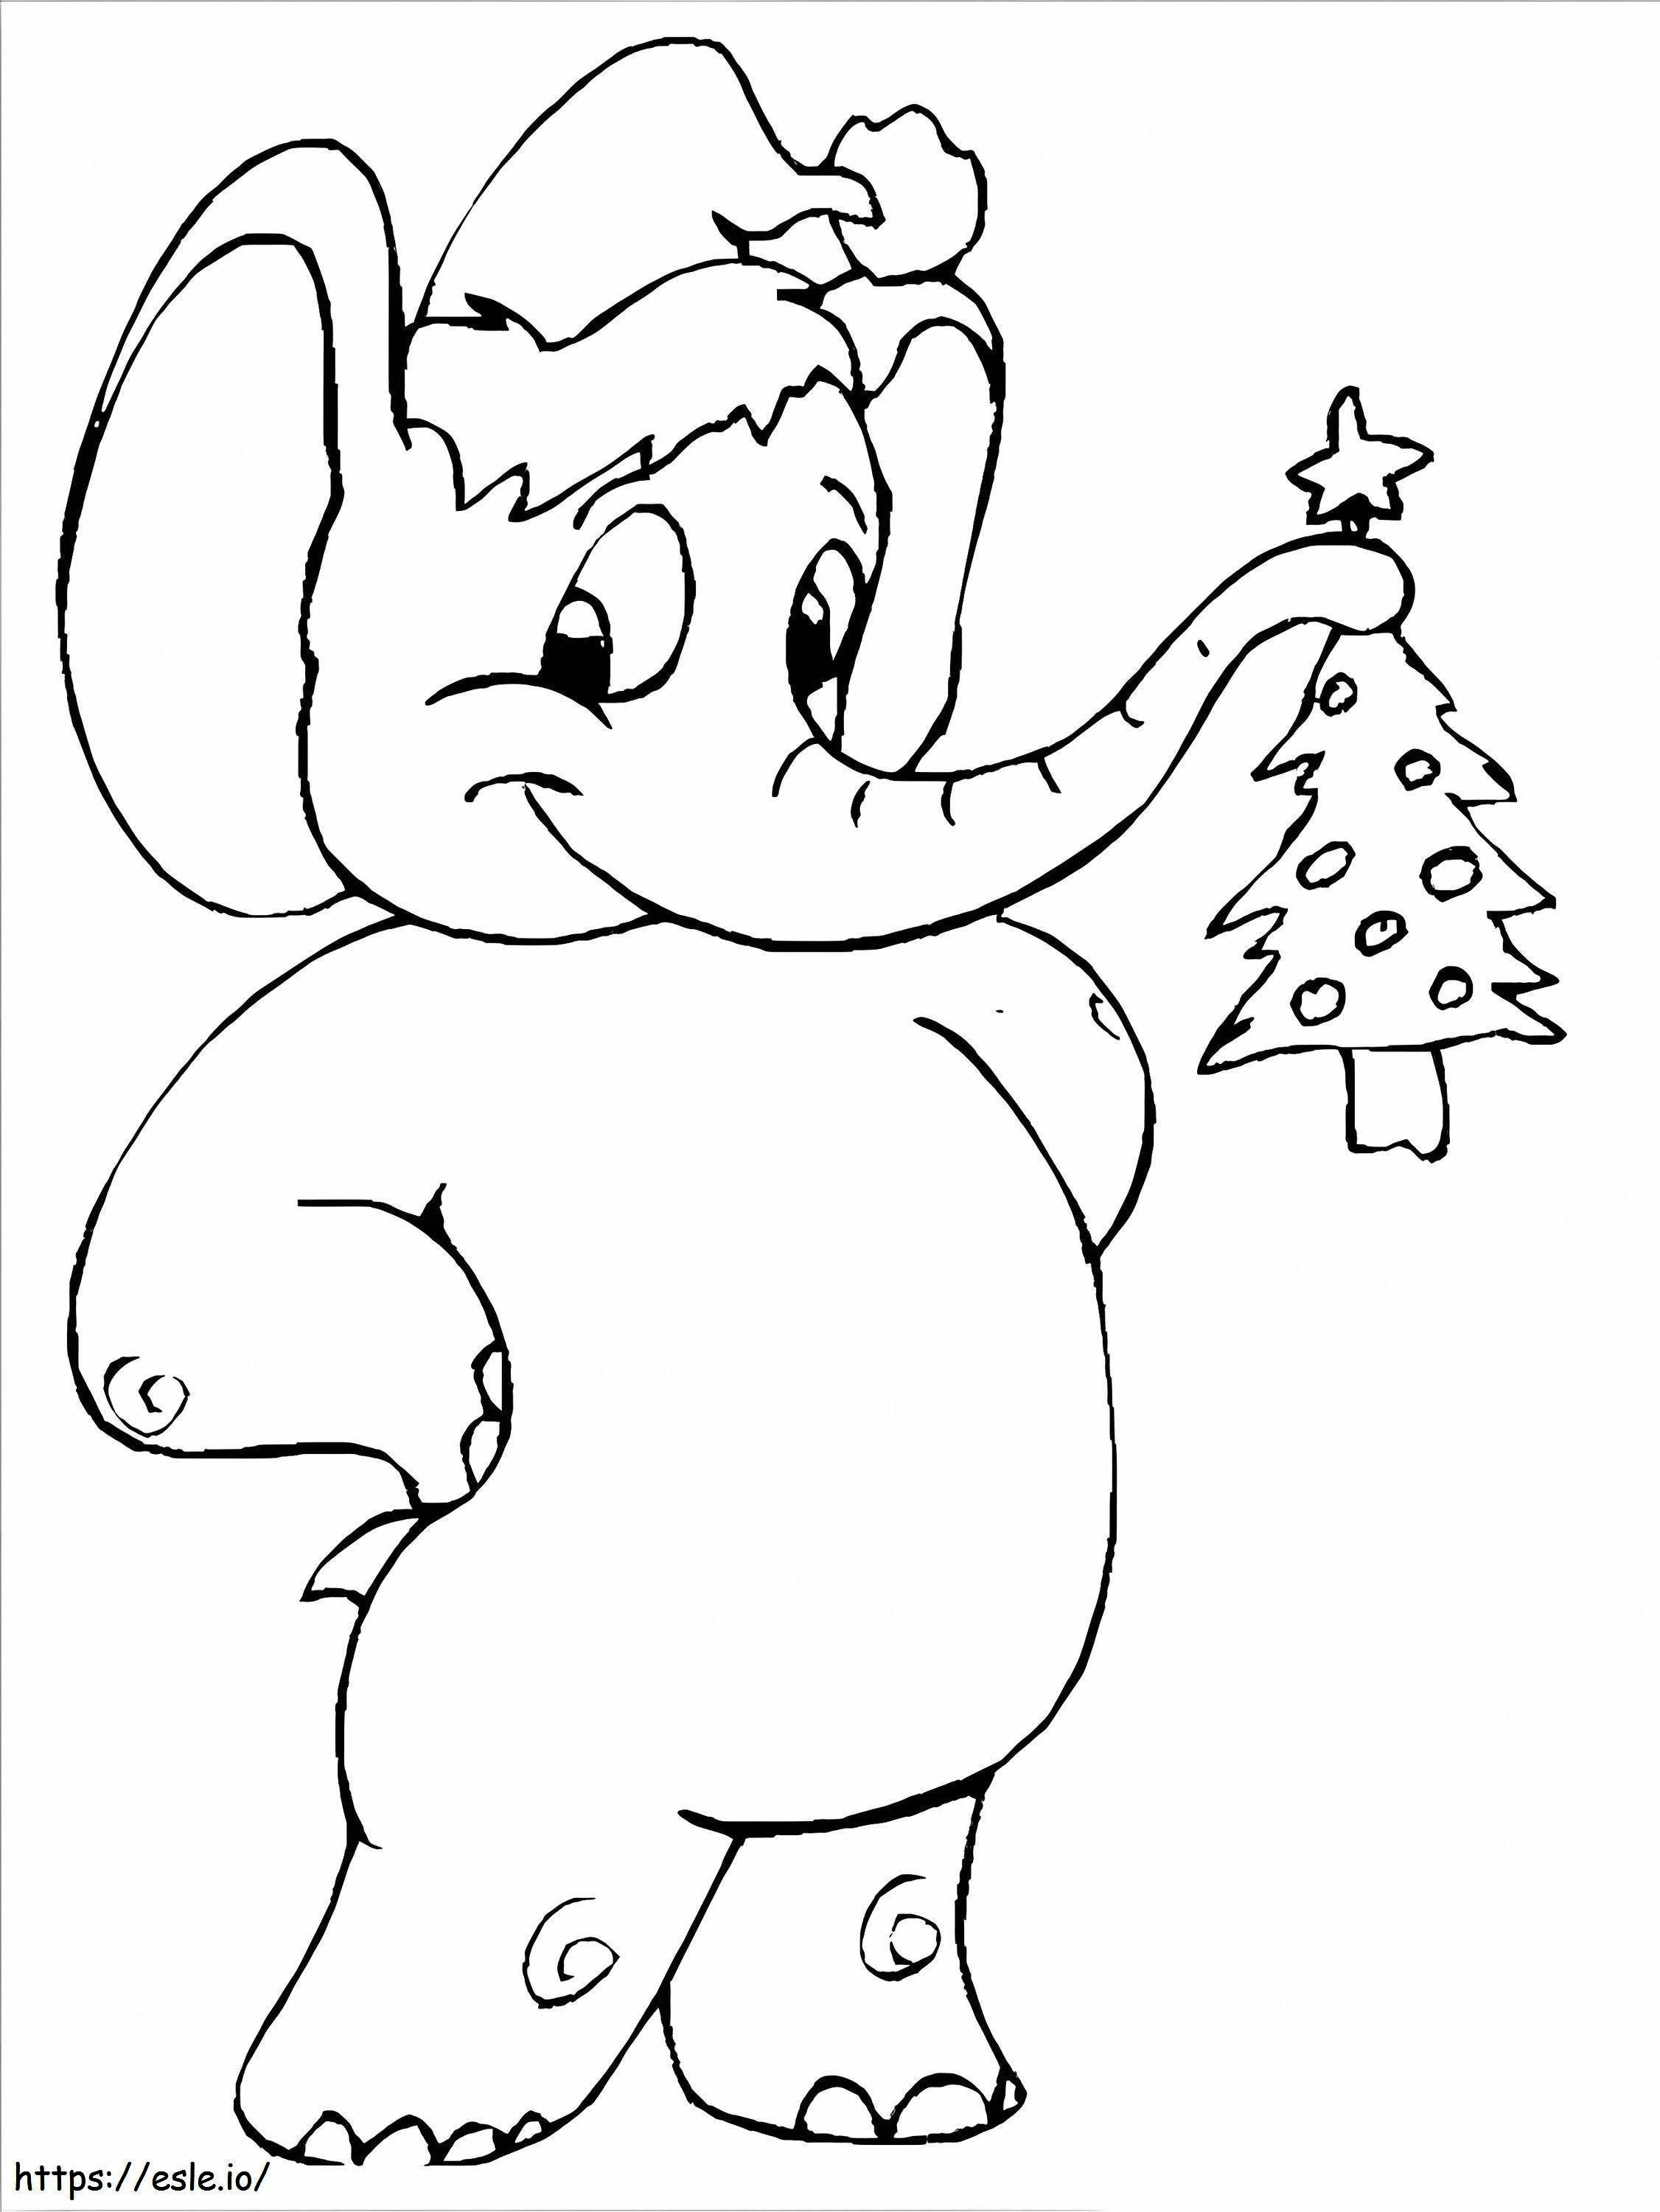 Christmas Elephant coloring page